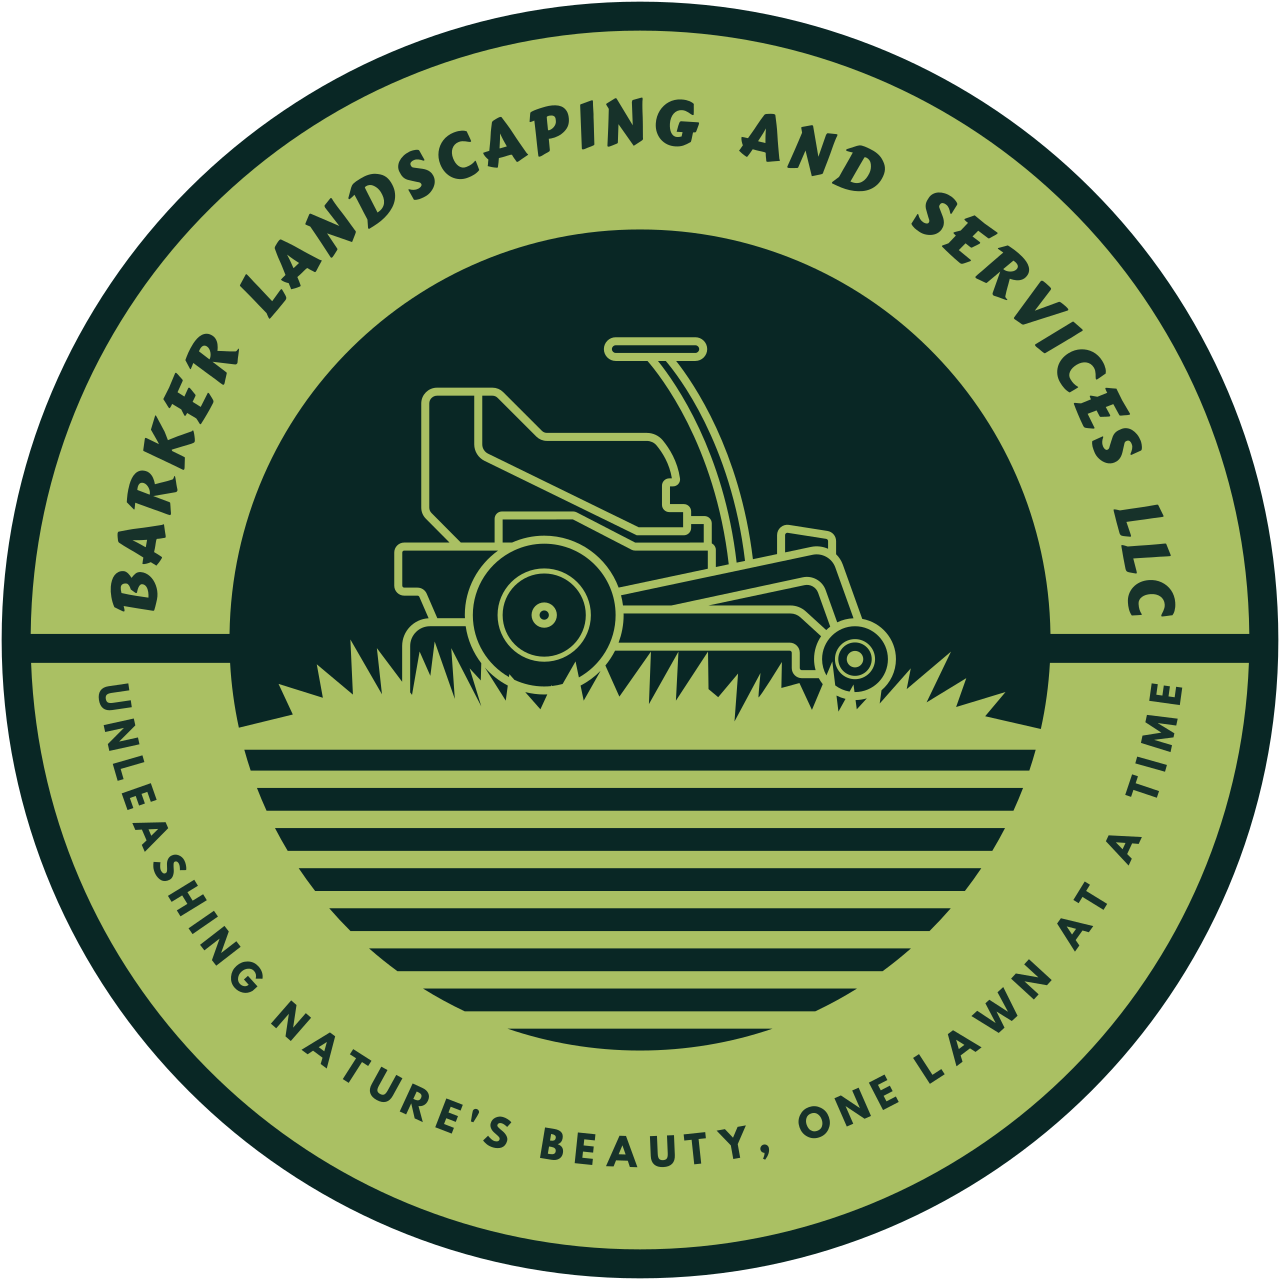 BARKER  LANDSCAPING  AND  SERVICES  LLC's logo